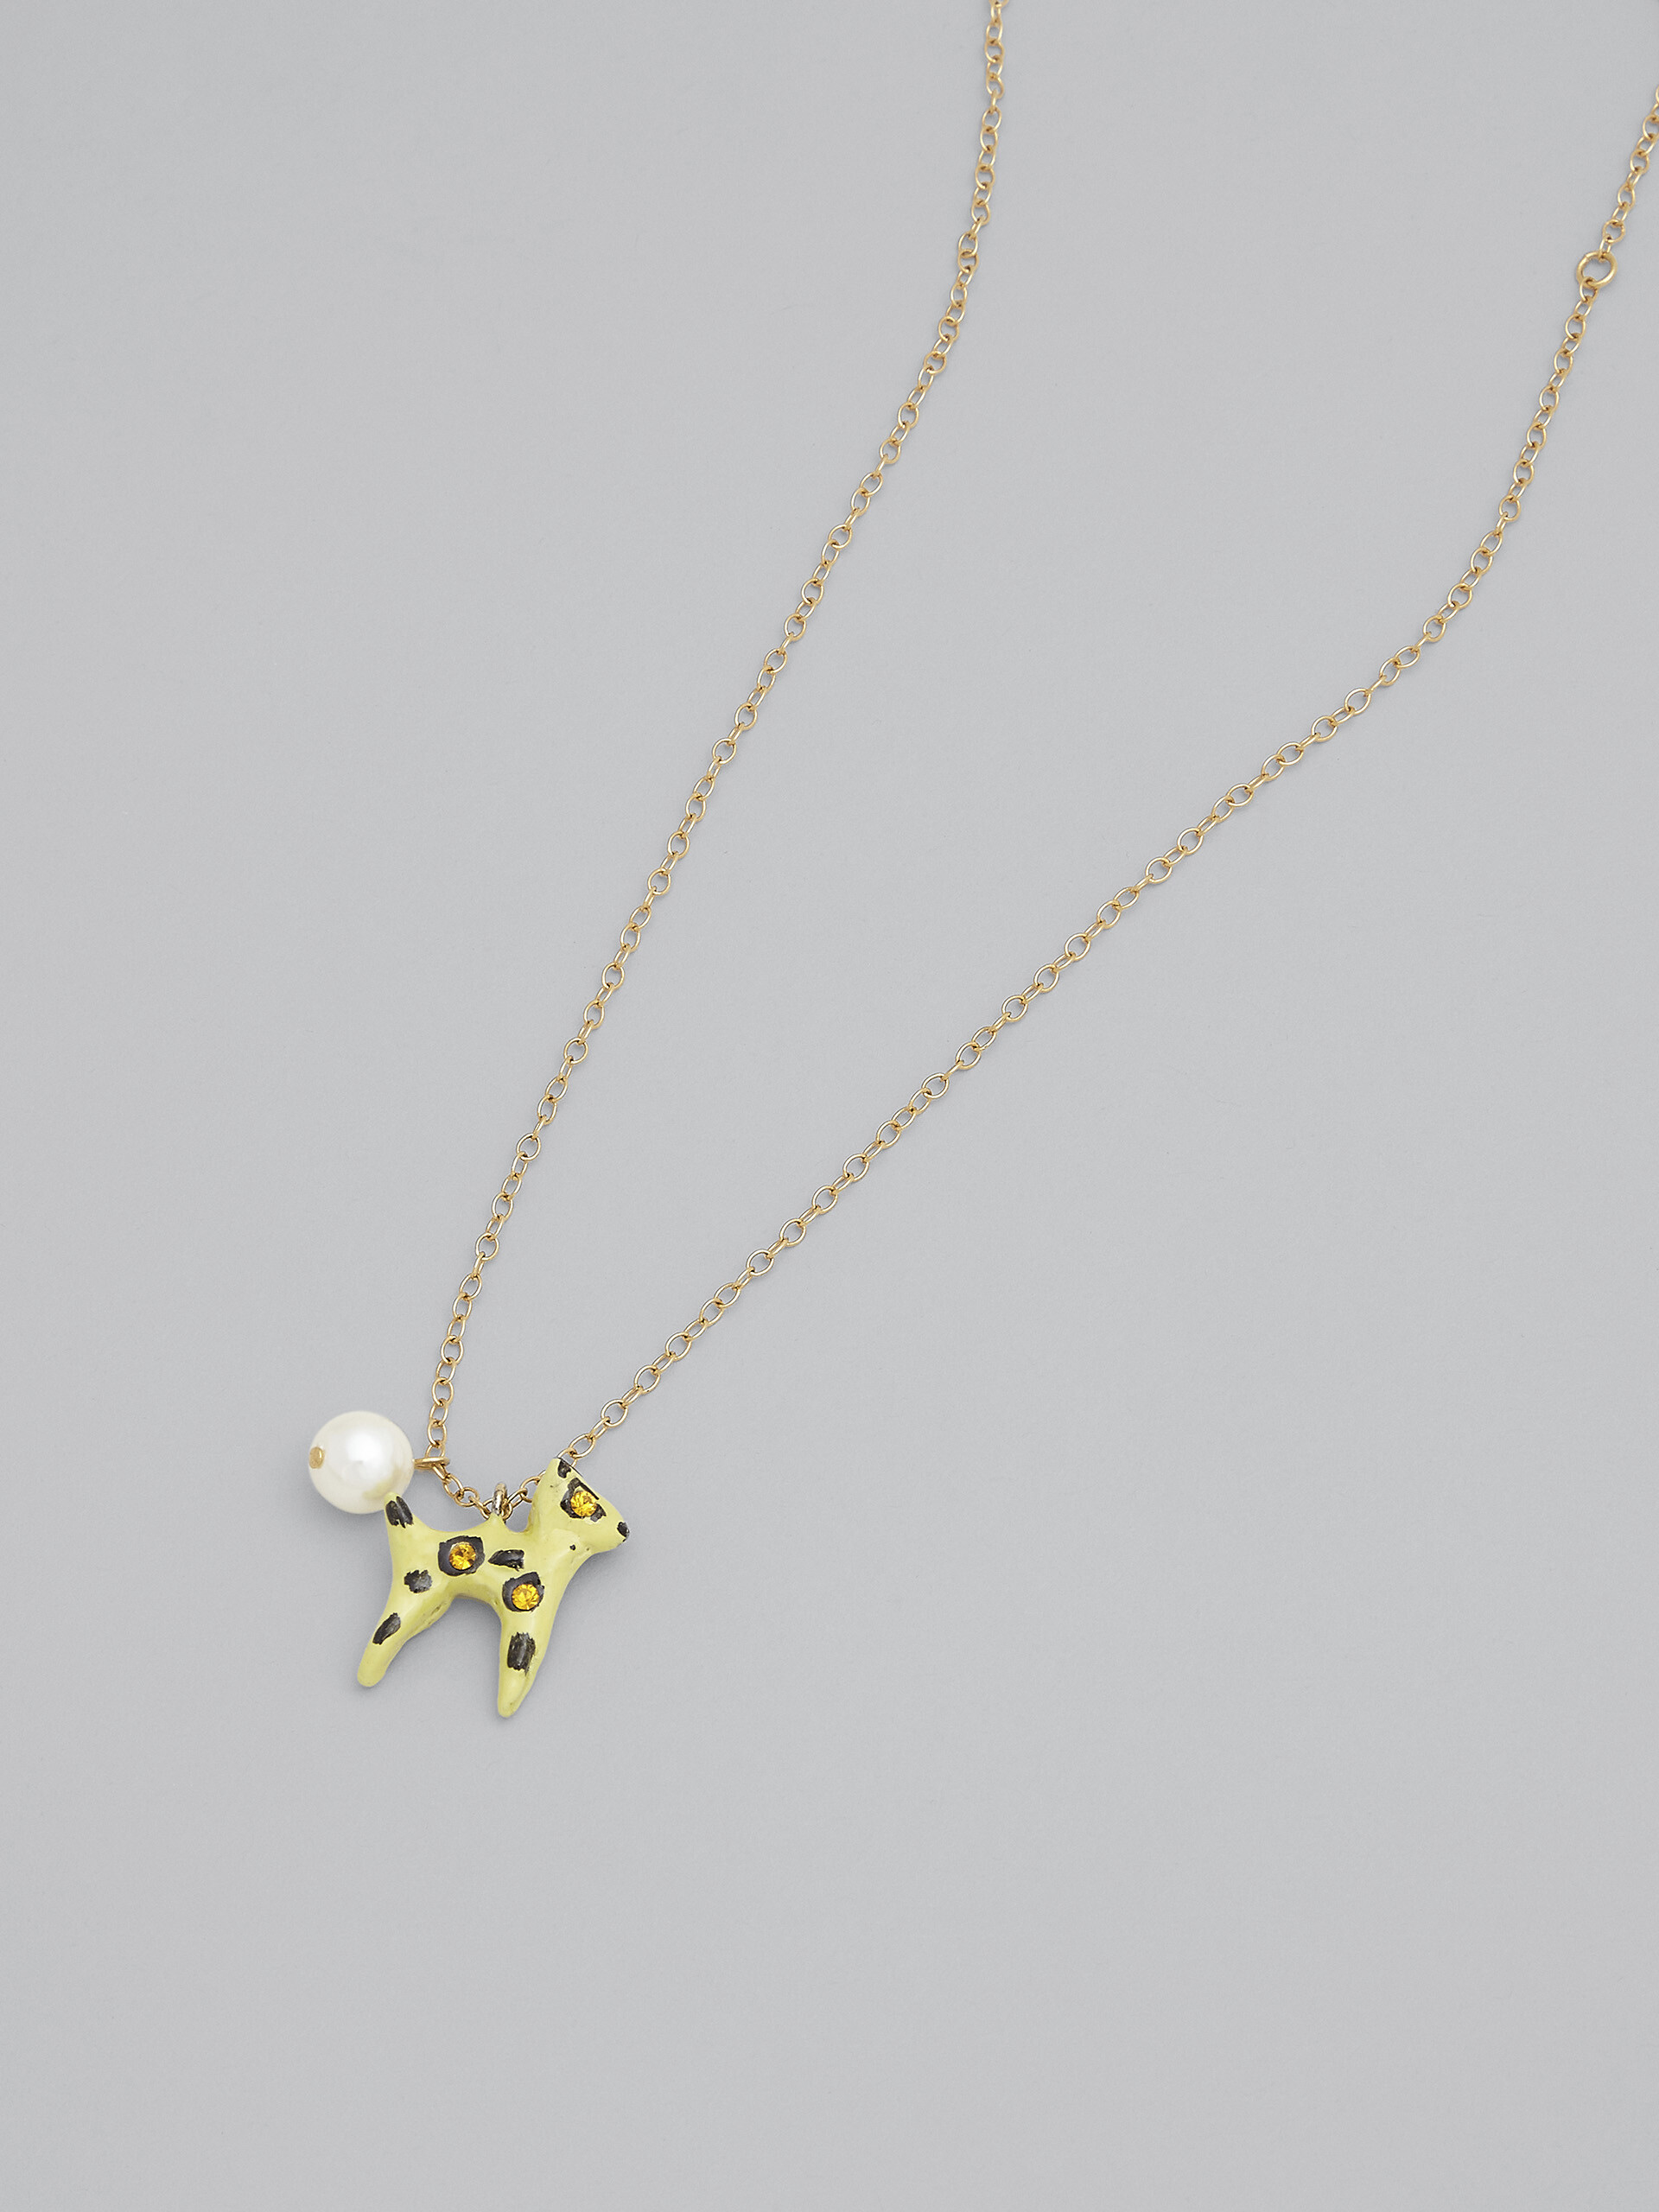 PLAYFUL yellow necklace - Necklaces - Image 3